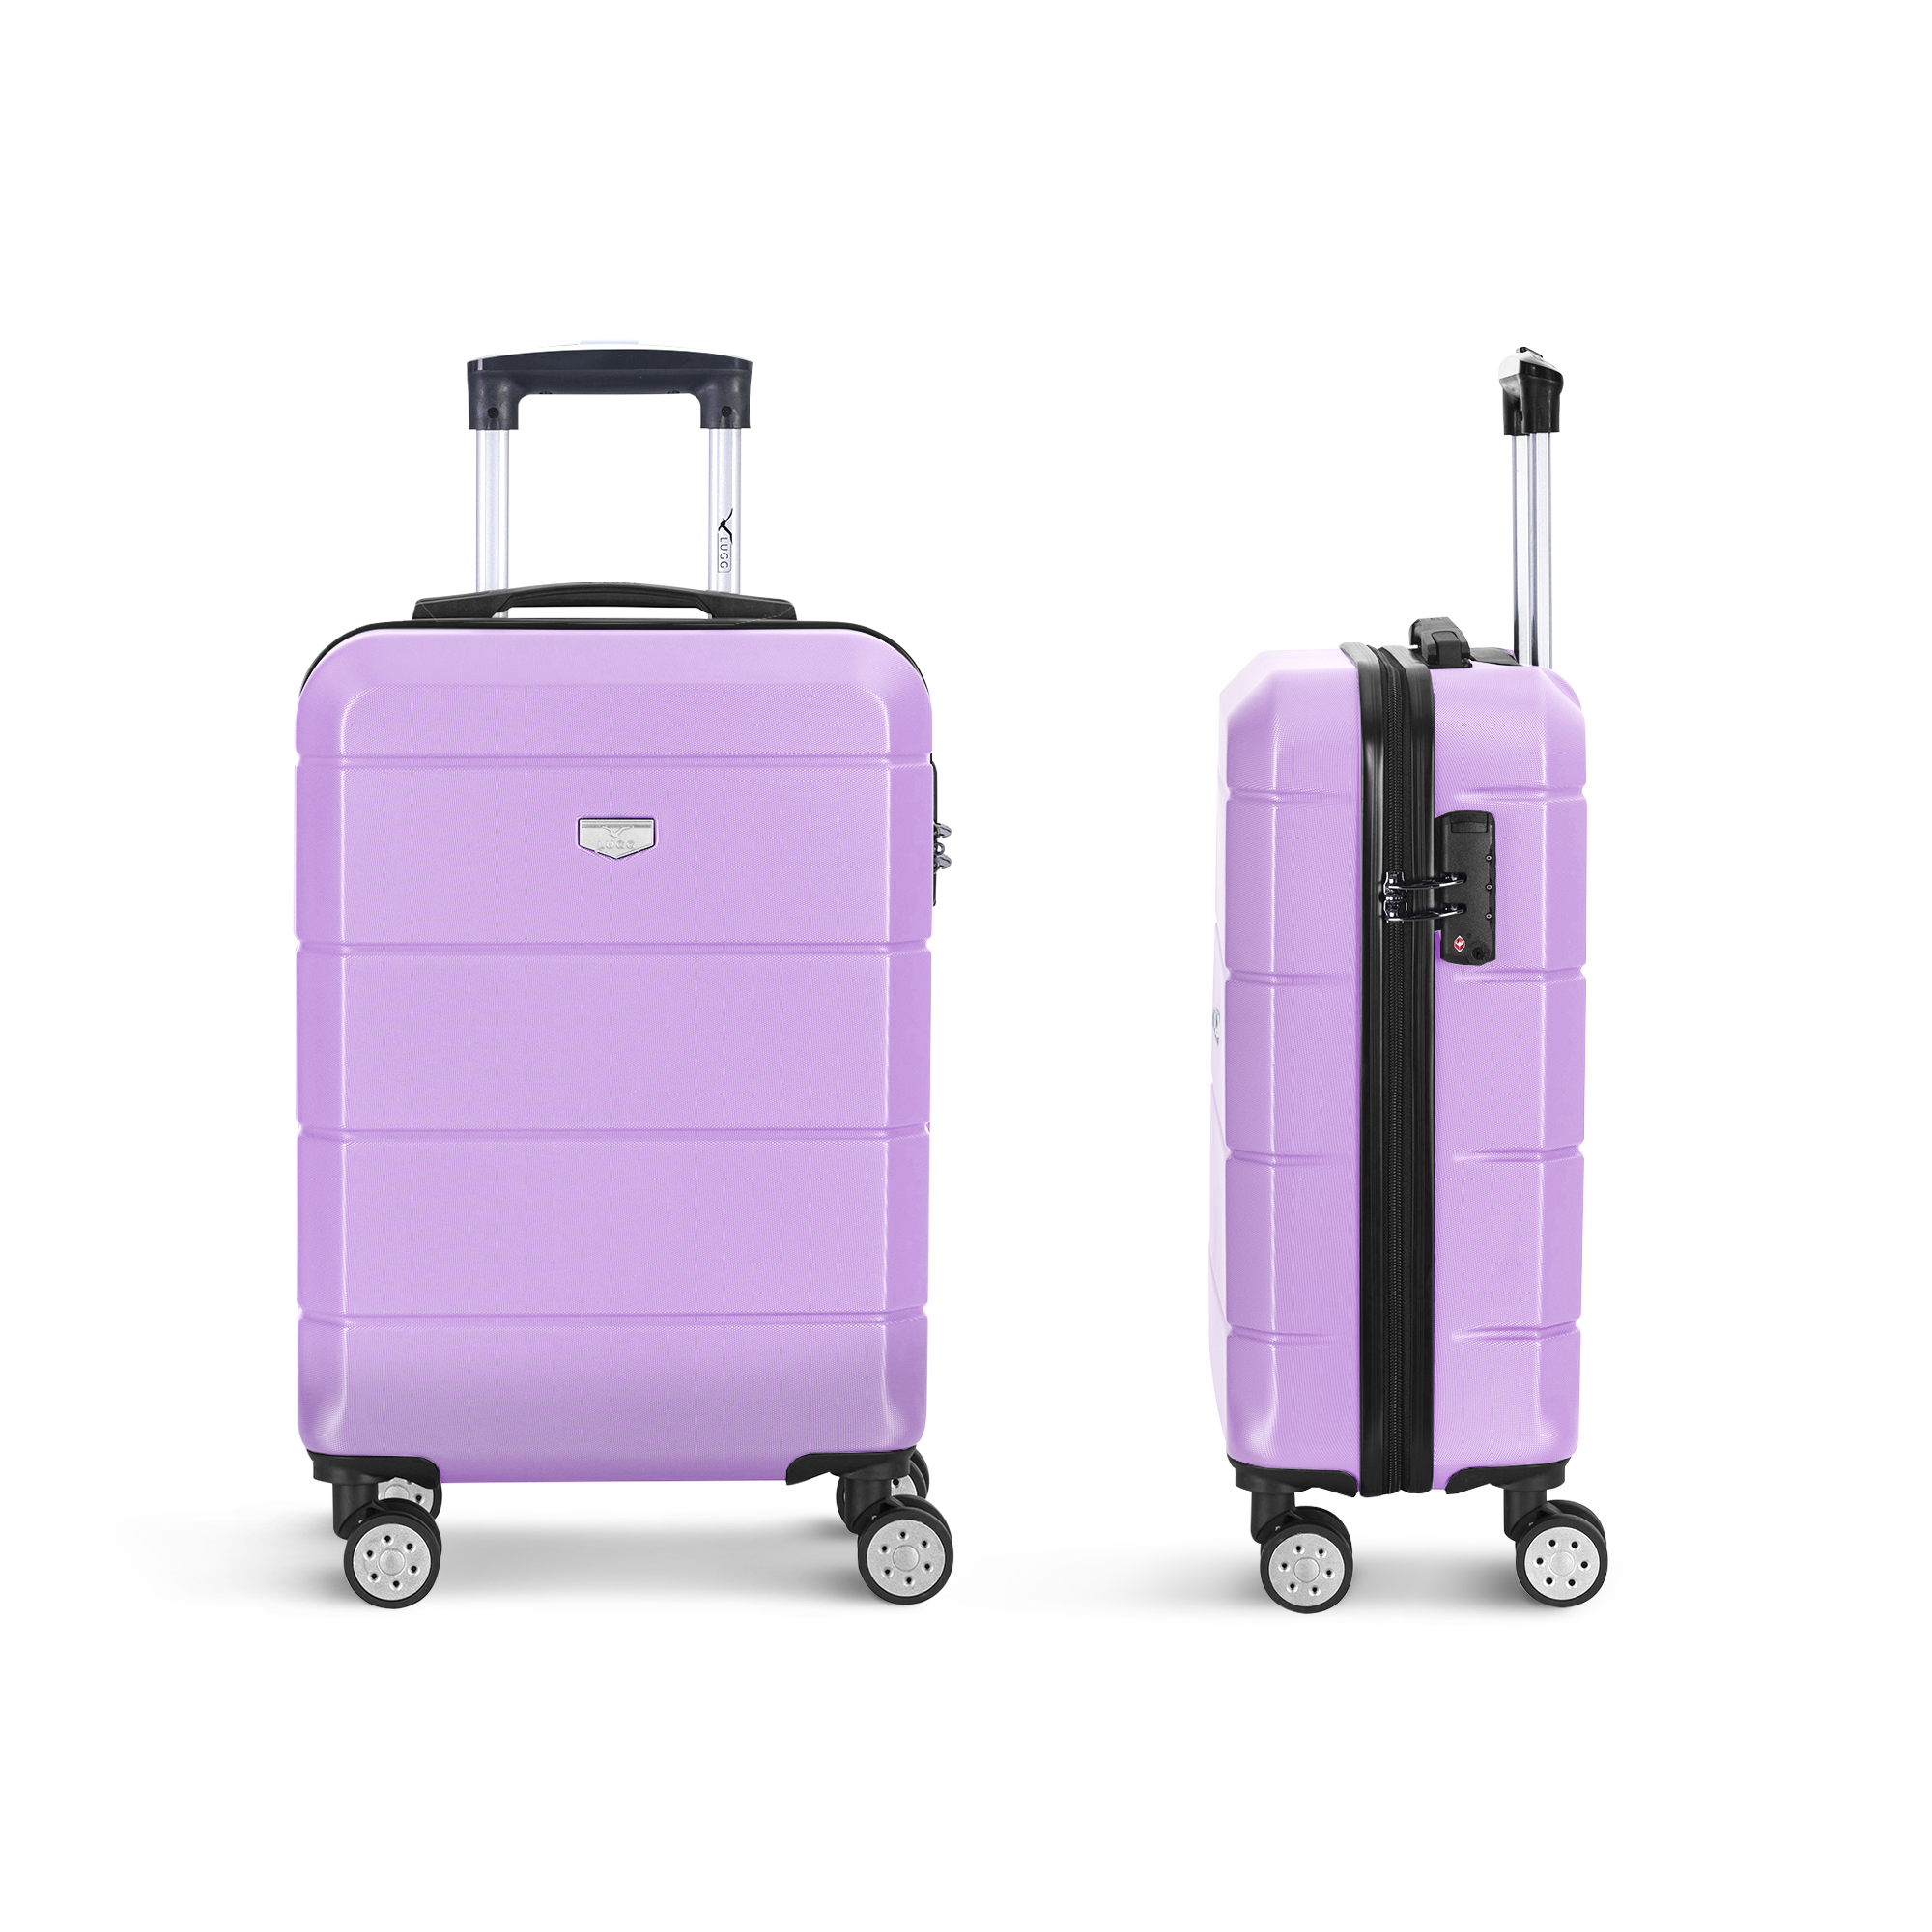 Jetset 20-inch Suitcase in Lavender